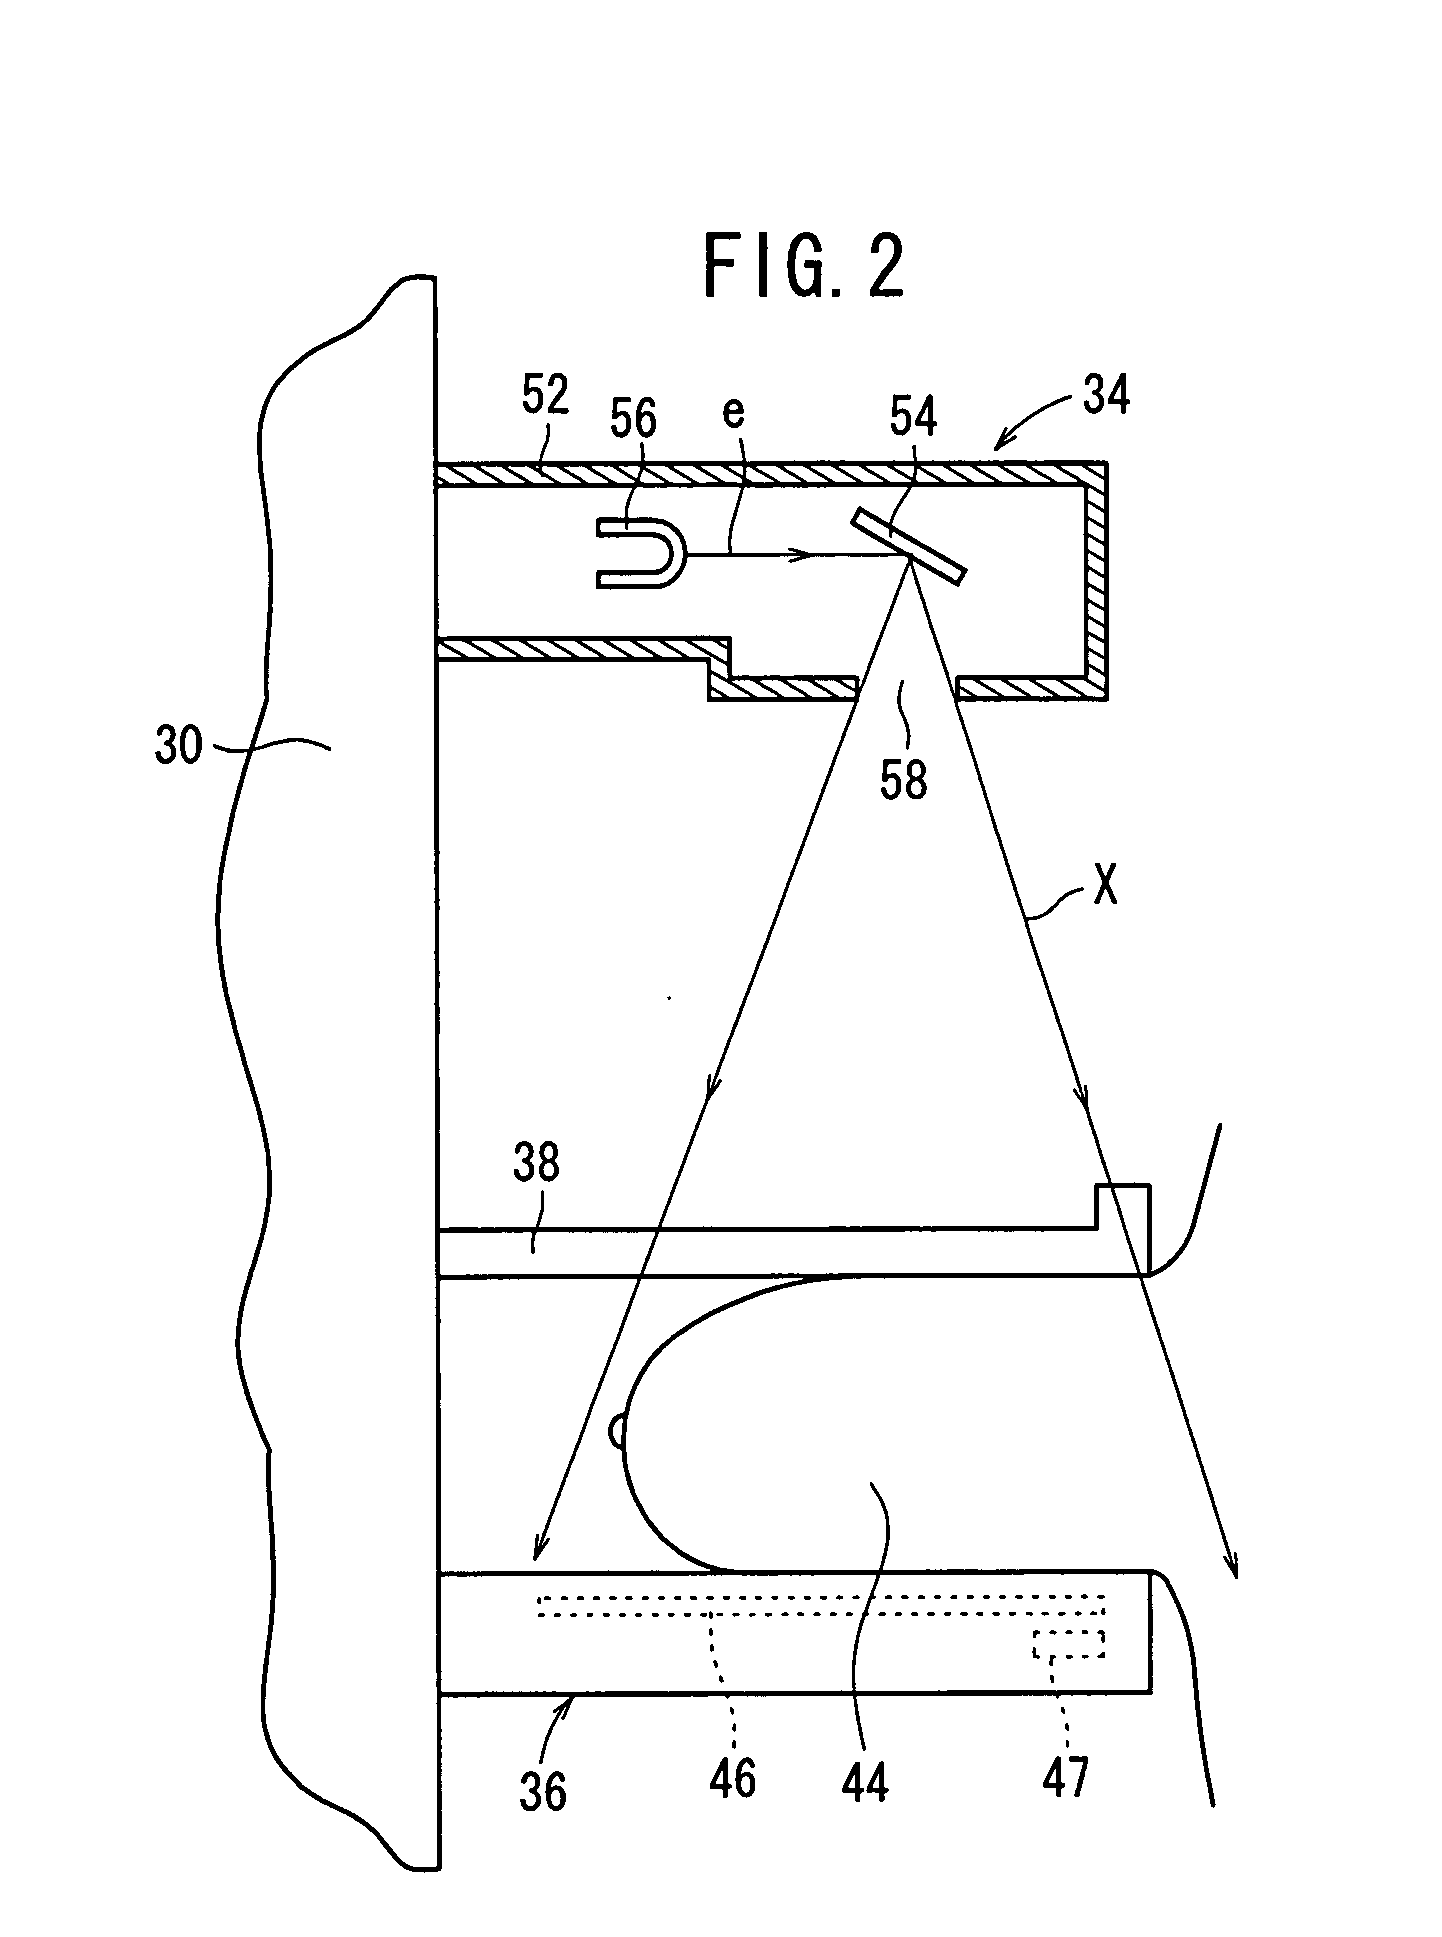 Apparatus for and method of capturing radiation image